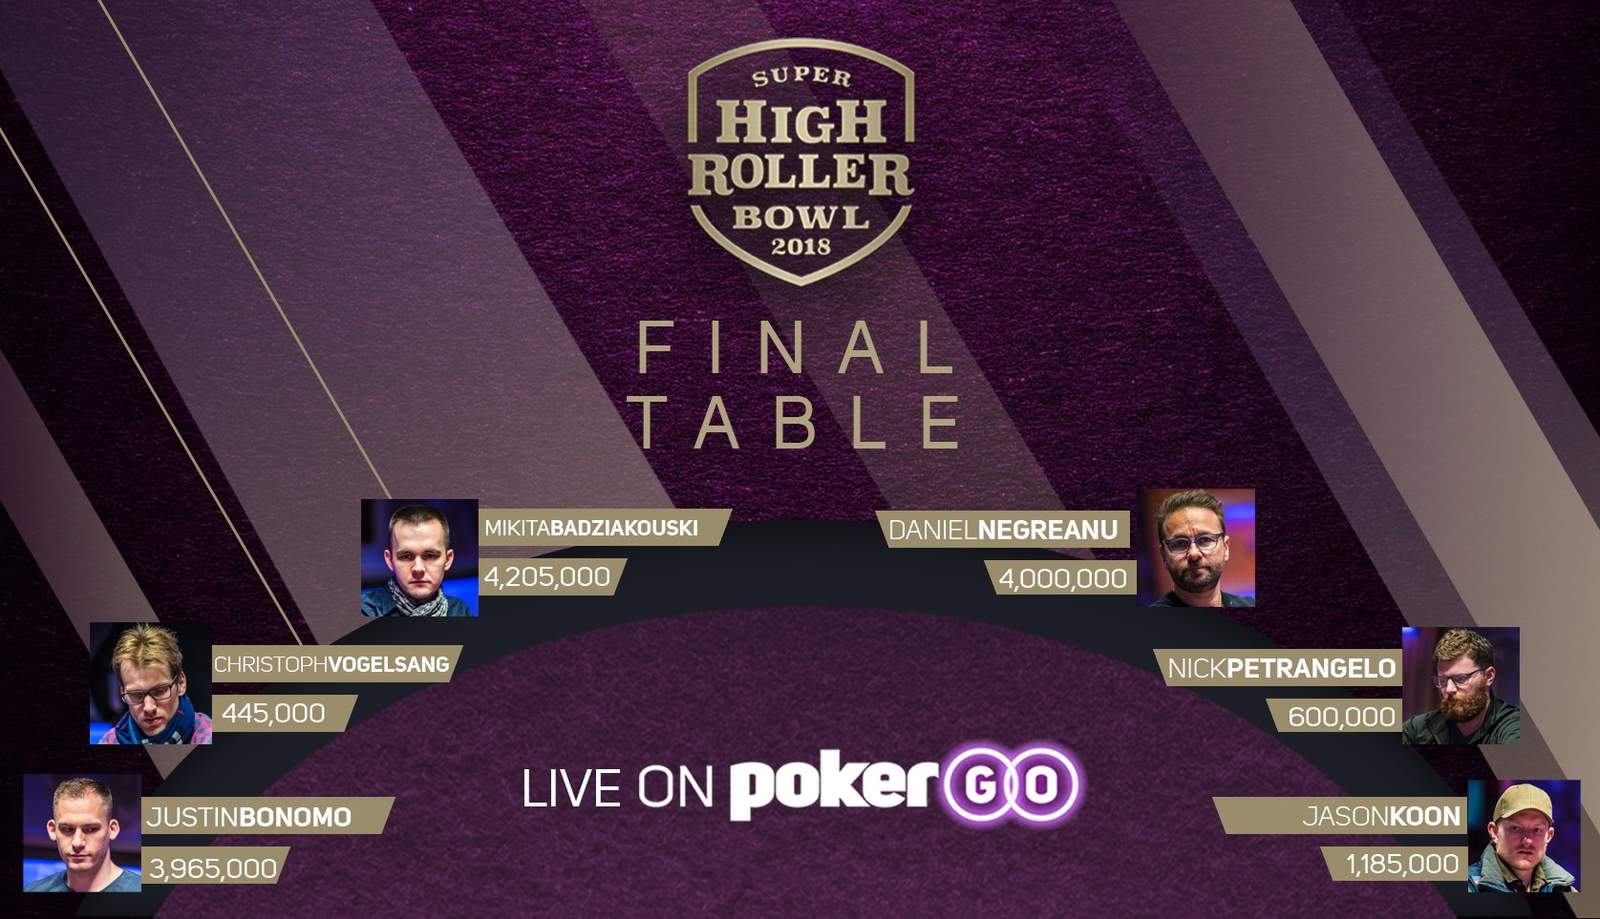 The Super High Roller Bowl Final Table is Set on PokerGO With Negreanu and Bonomo Contending